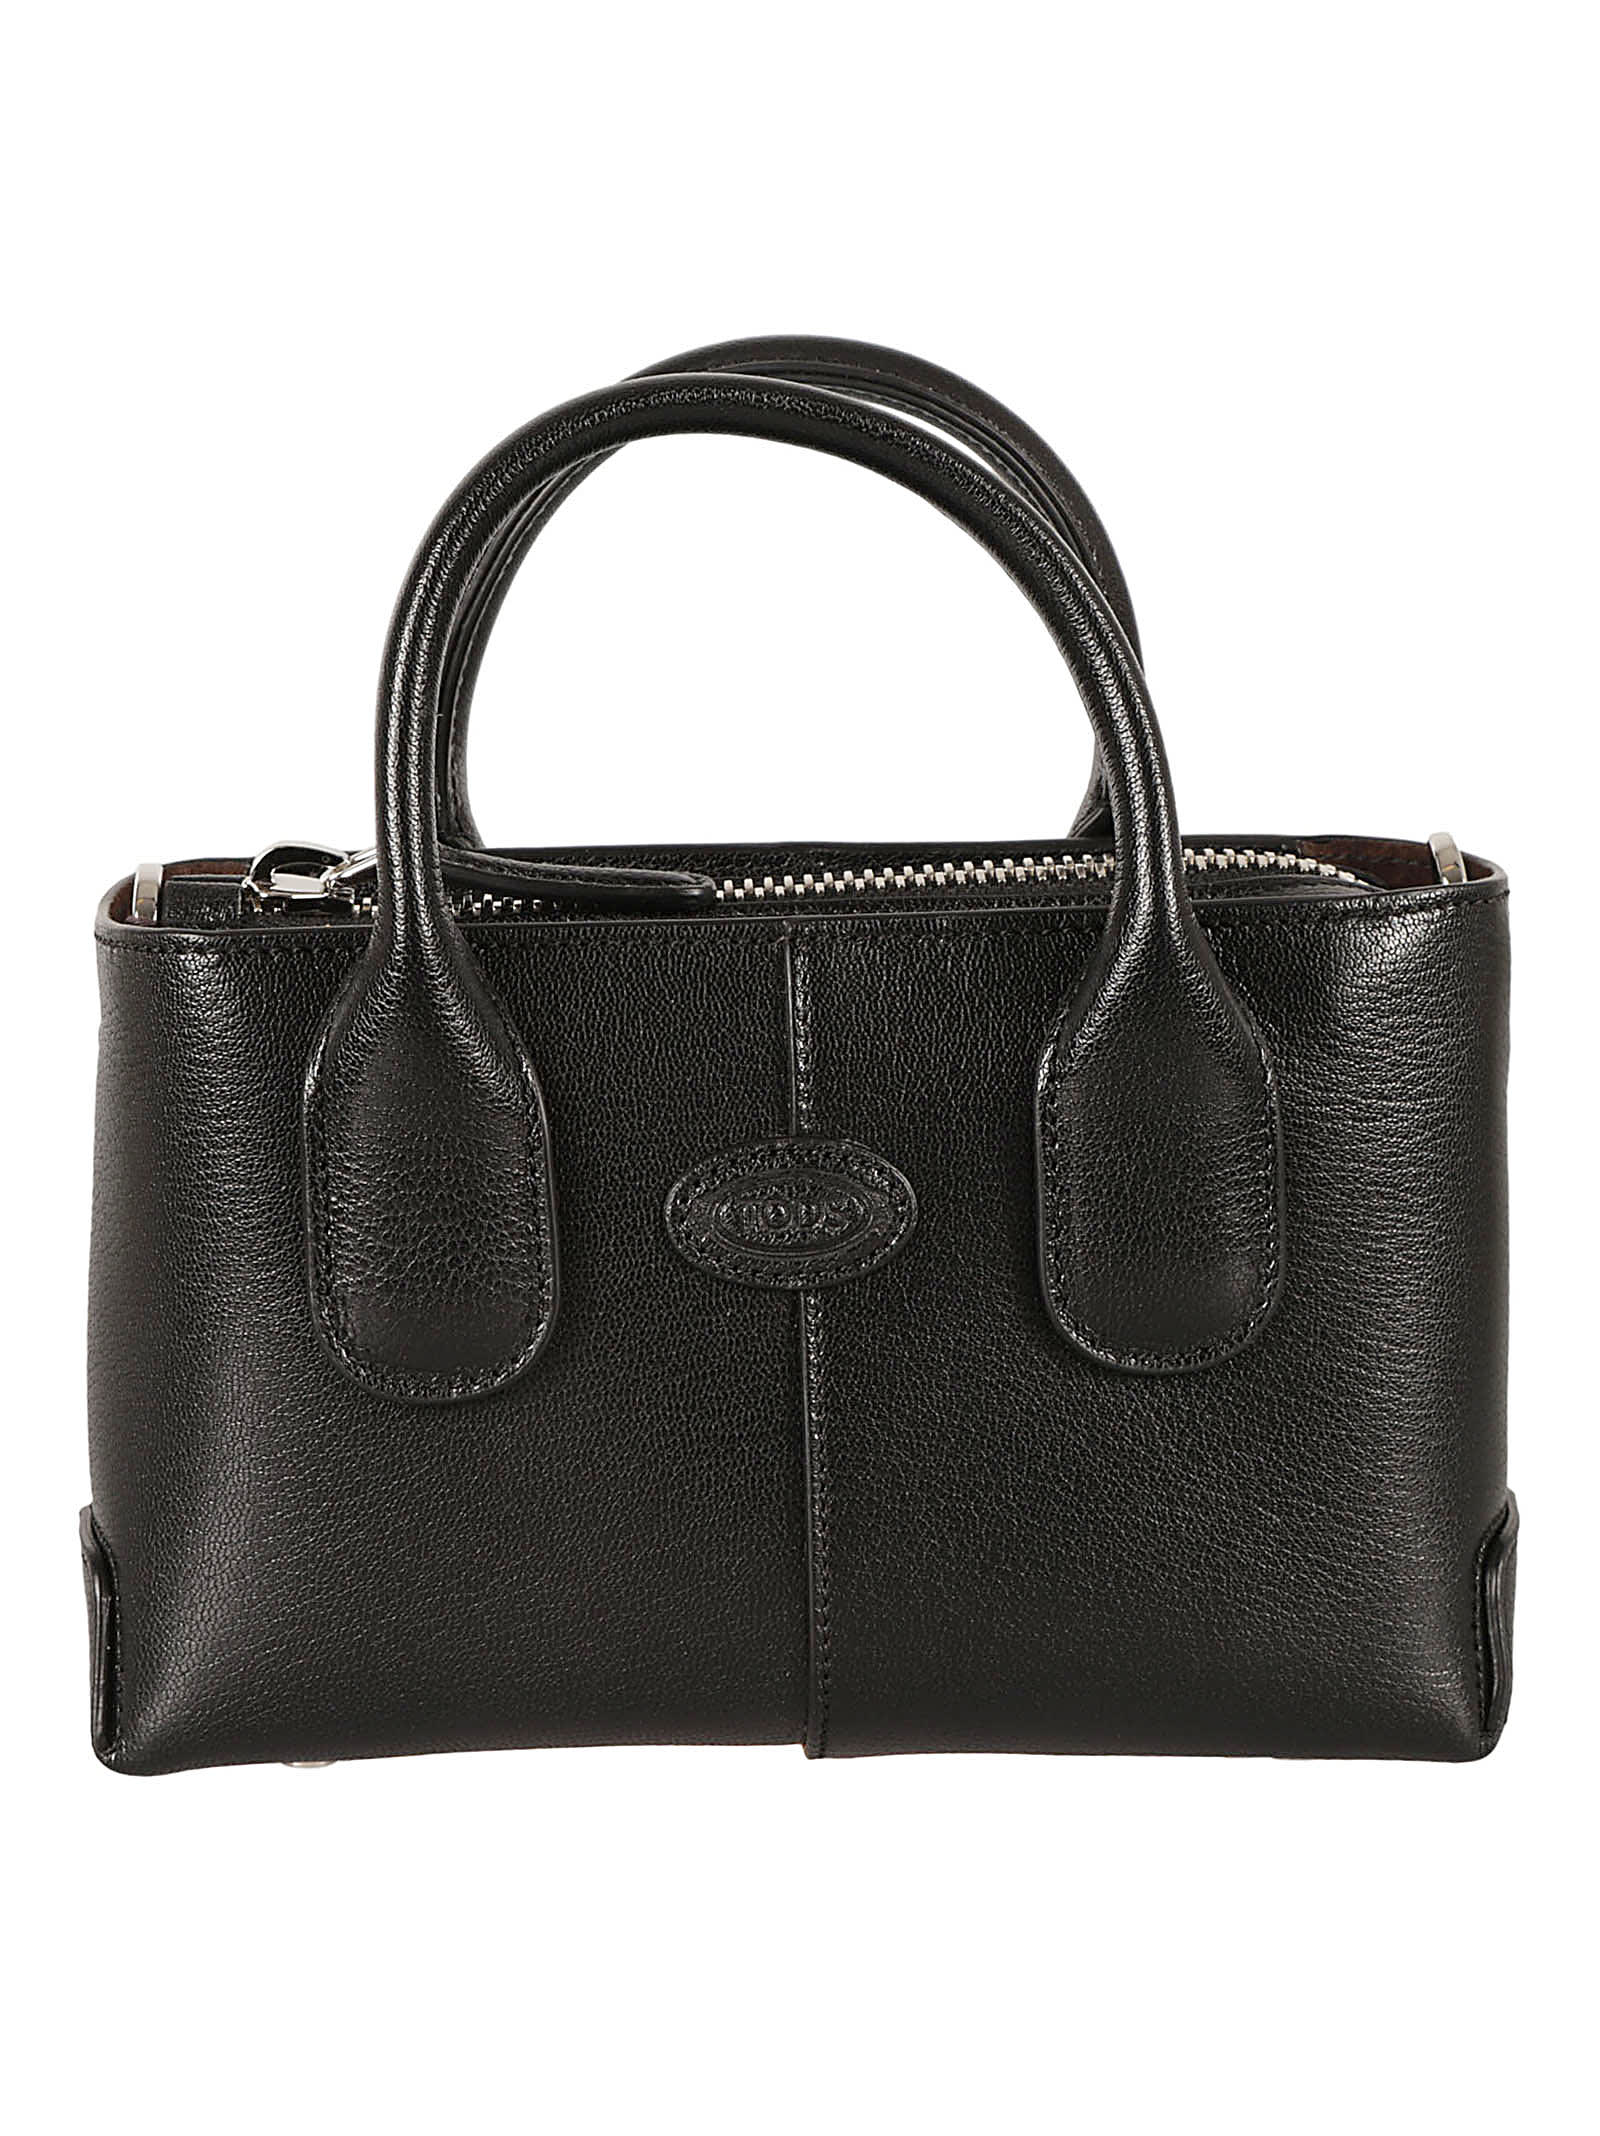 TOD'S LOGO PATCH TOP ZIP TOTE